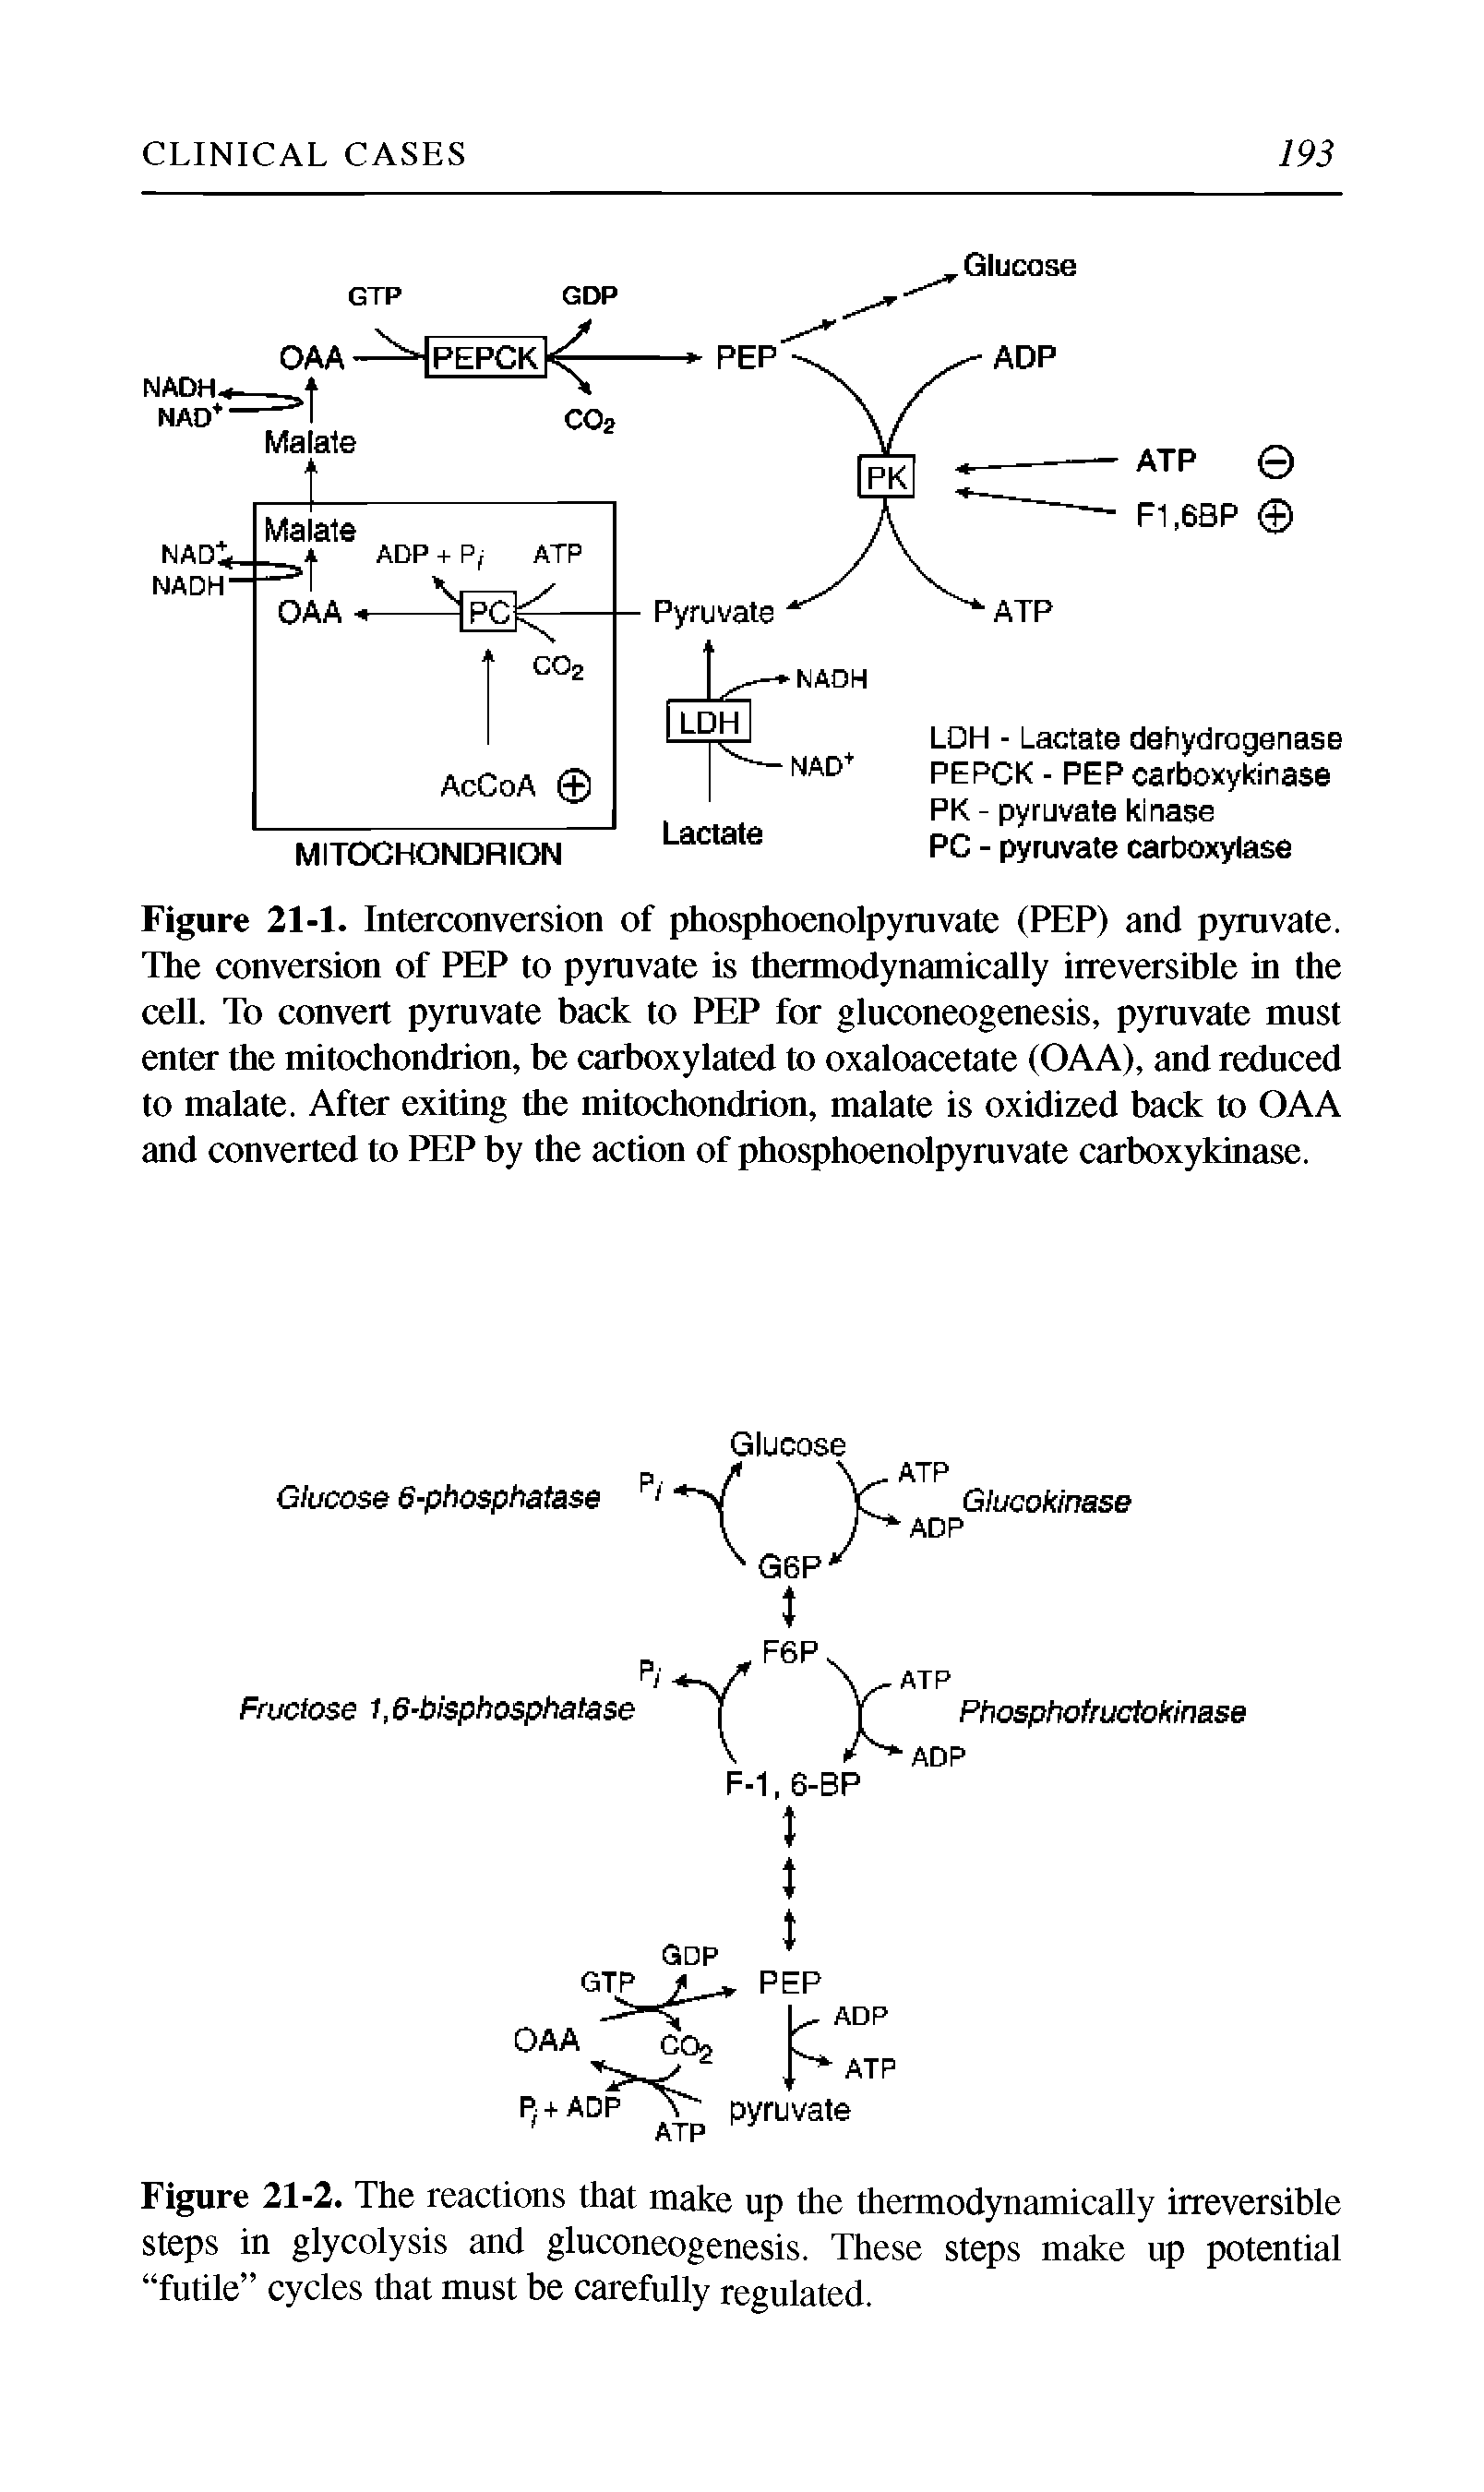 Figure 21-1. Interconversion of phosphoenolpyruvate (PEP) and pymvate. The conversion of PEP to pyruvate is thermodynamically irreversible in the cell. To convert pyruvate back to PEP for gluconeogenesis, pyruvate must enter the mitochondrion, be carboxylated to oxaloacetate (OAA), and reduced to malate. After exiting the mitochondrion, malate is oxidized back to OAA and converted to PEP by the action of phosphoenolpyruvate carboxykinase.